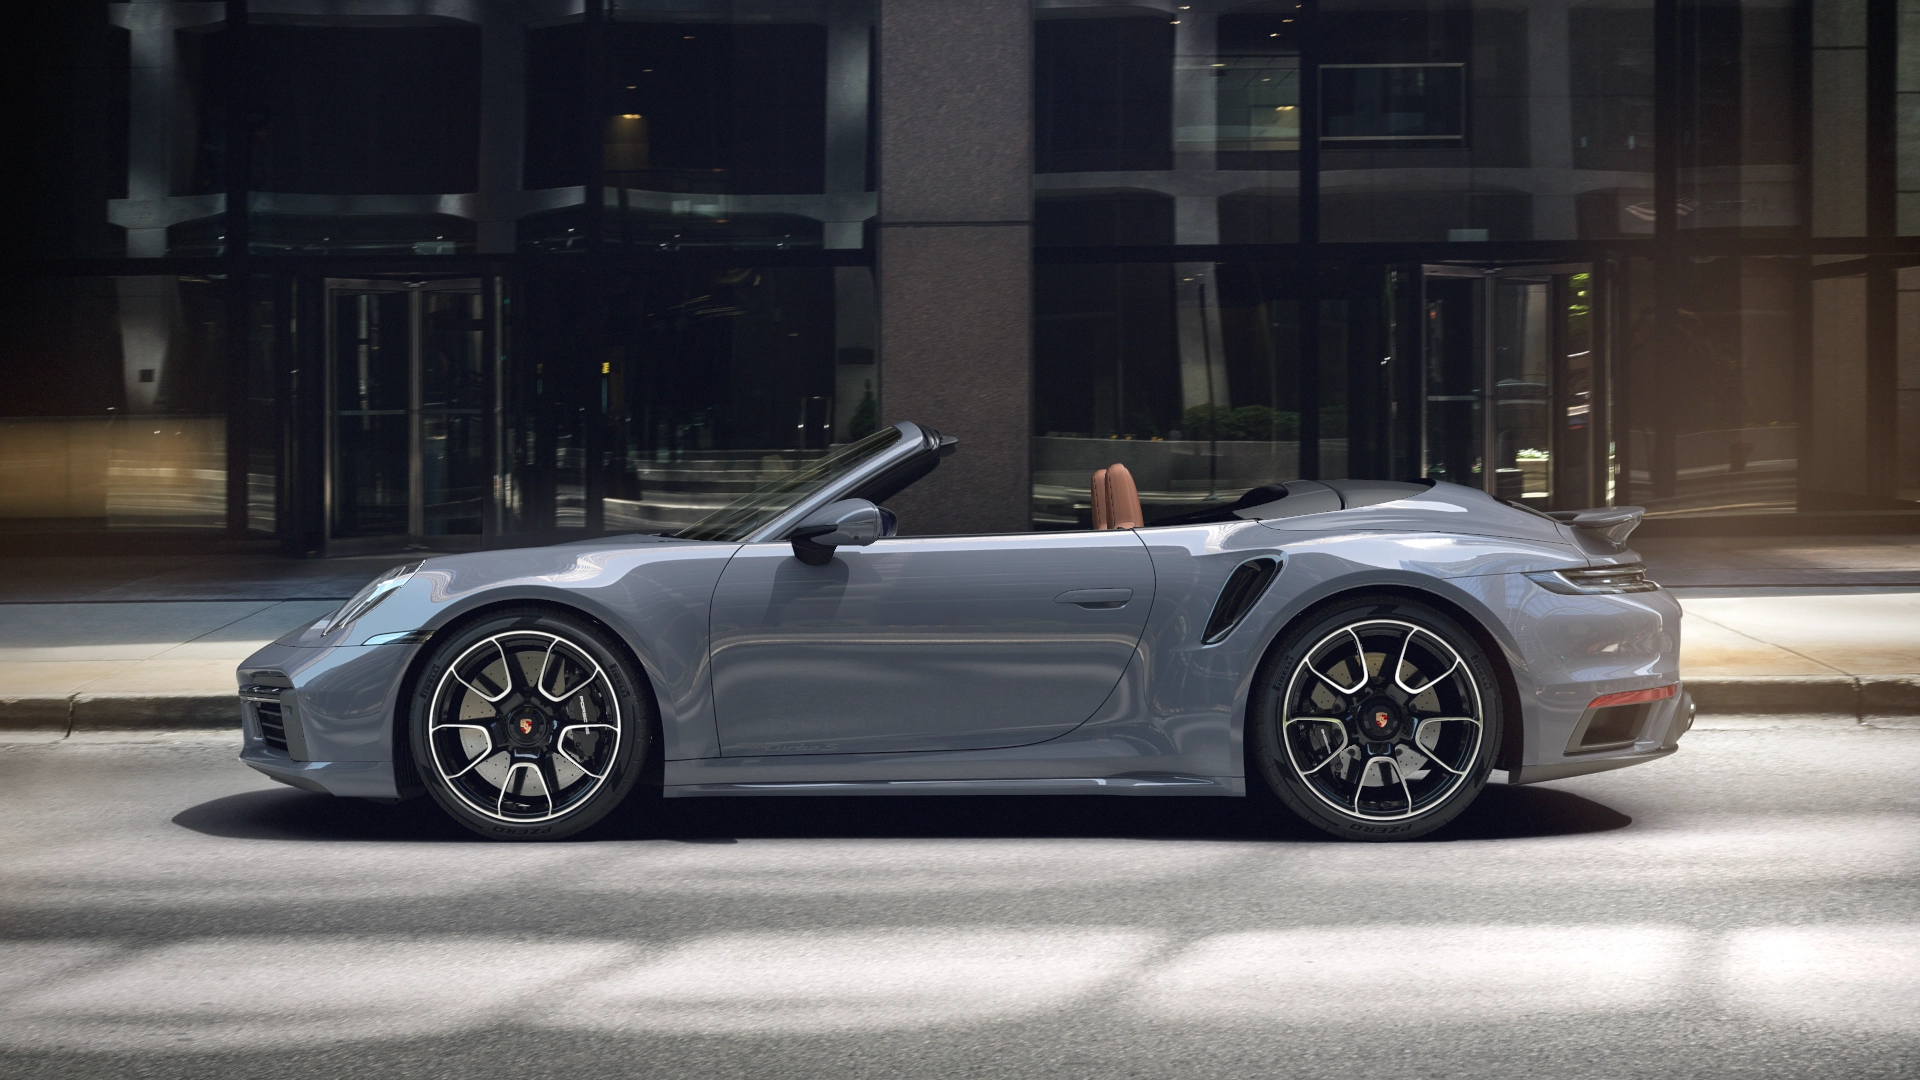 911 Turbo S Cabriolet side view